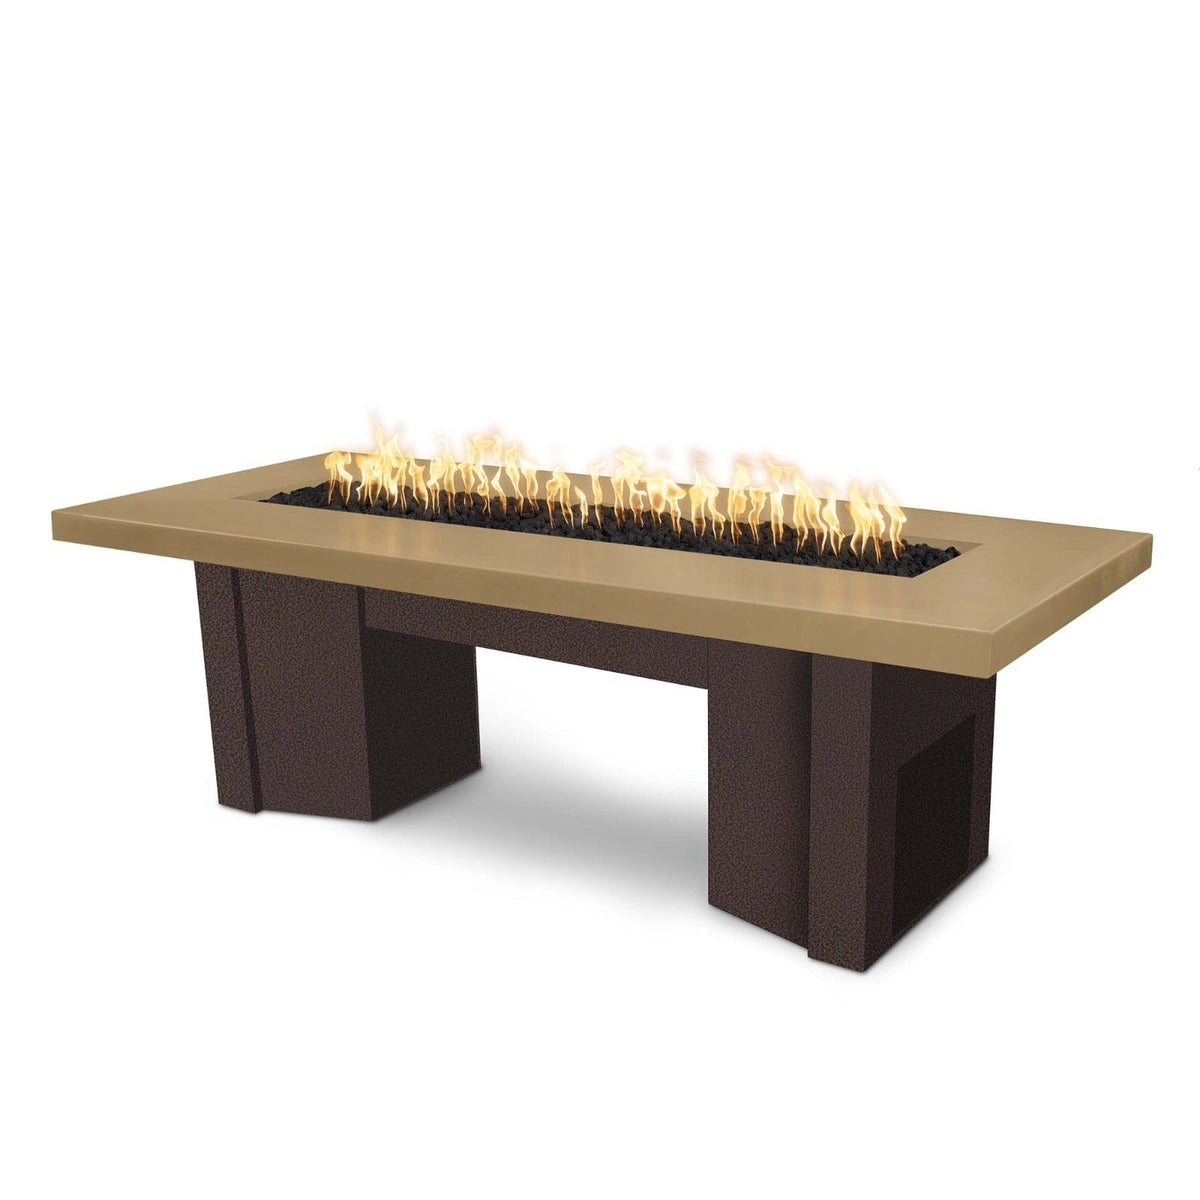 The Outdoor Plus Fire Features Brown (-BRN) / Copper Vein Powder Coated Steel (-CPV) The Outdoor Plus 60&quot; Alameda Fire Table Smooth Concrete in Liquid Propane - Match Lit with Flame Sense System / OPT-ALMGFRC60FSML-LP